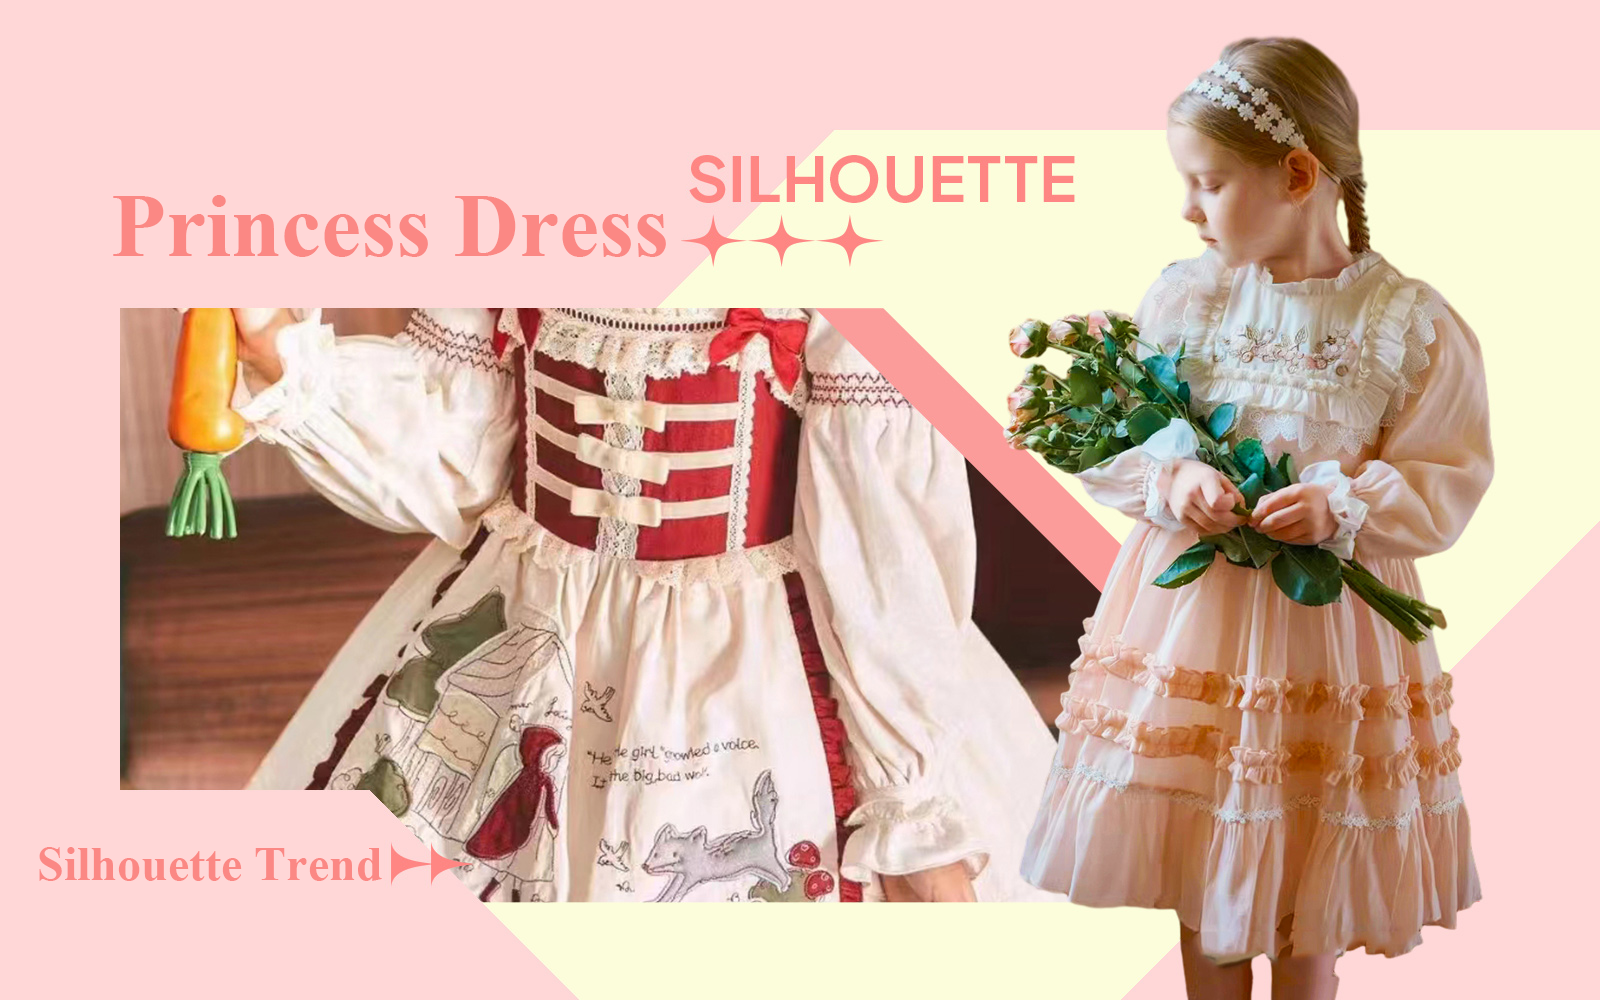 The Silhouette Trend for Kids' Princess Dress